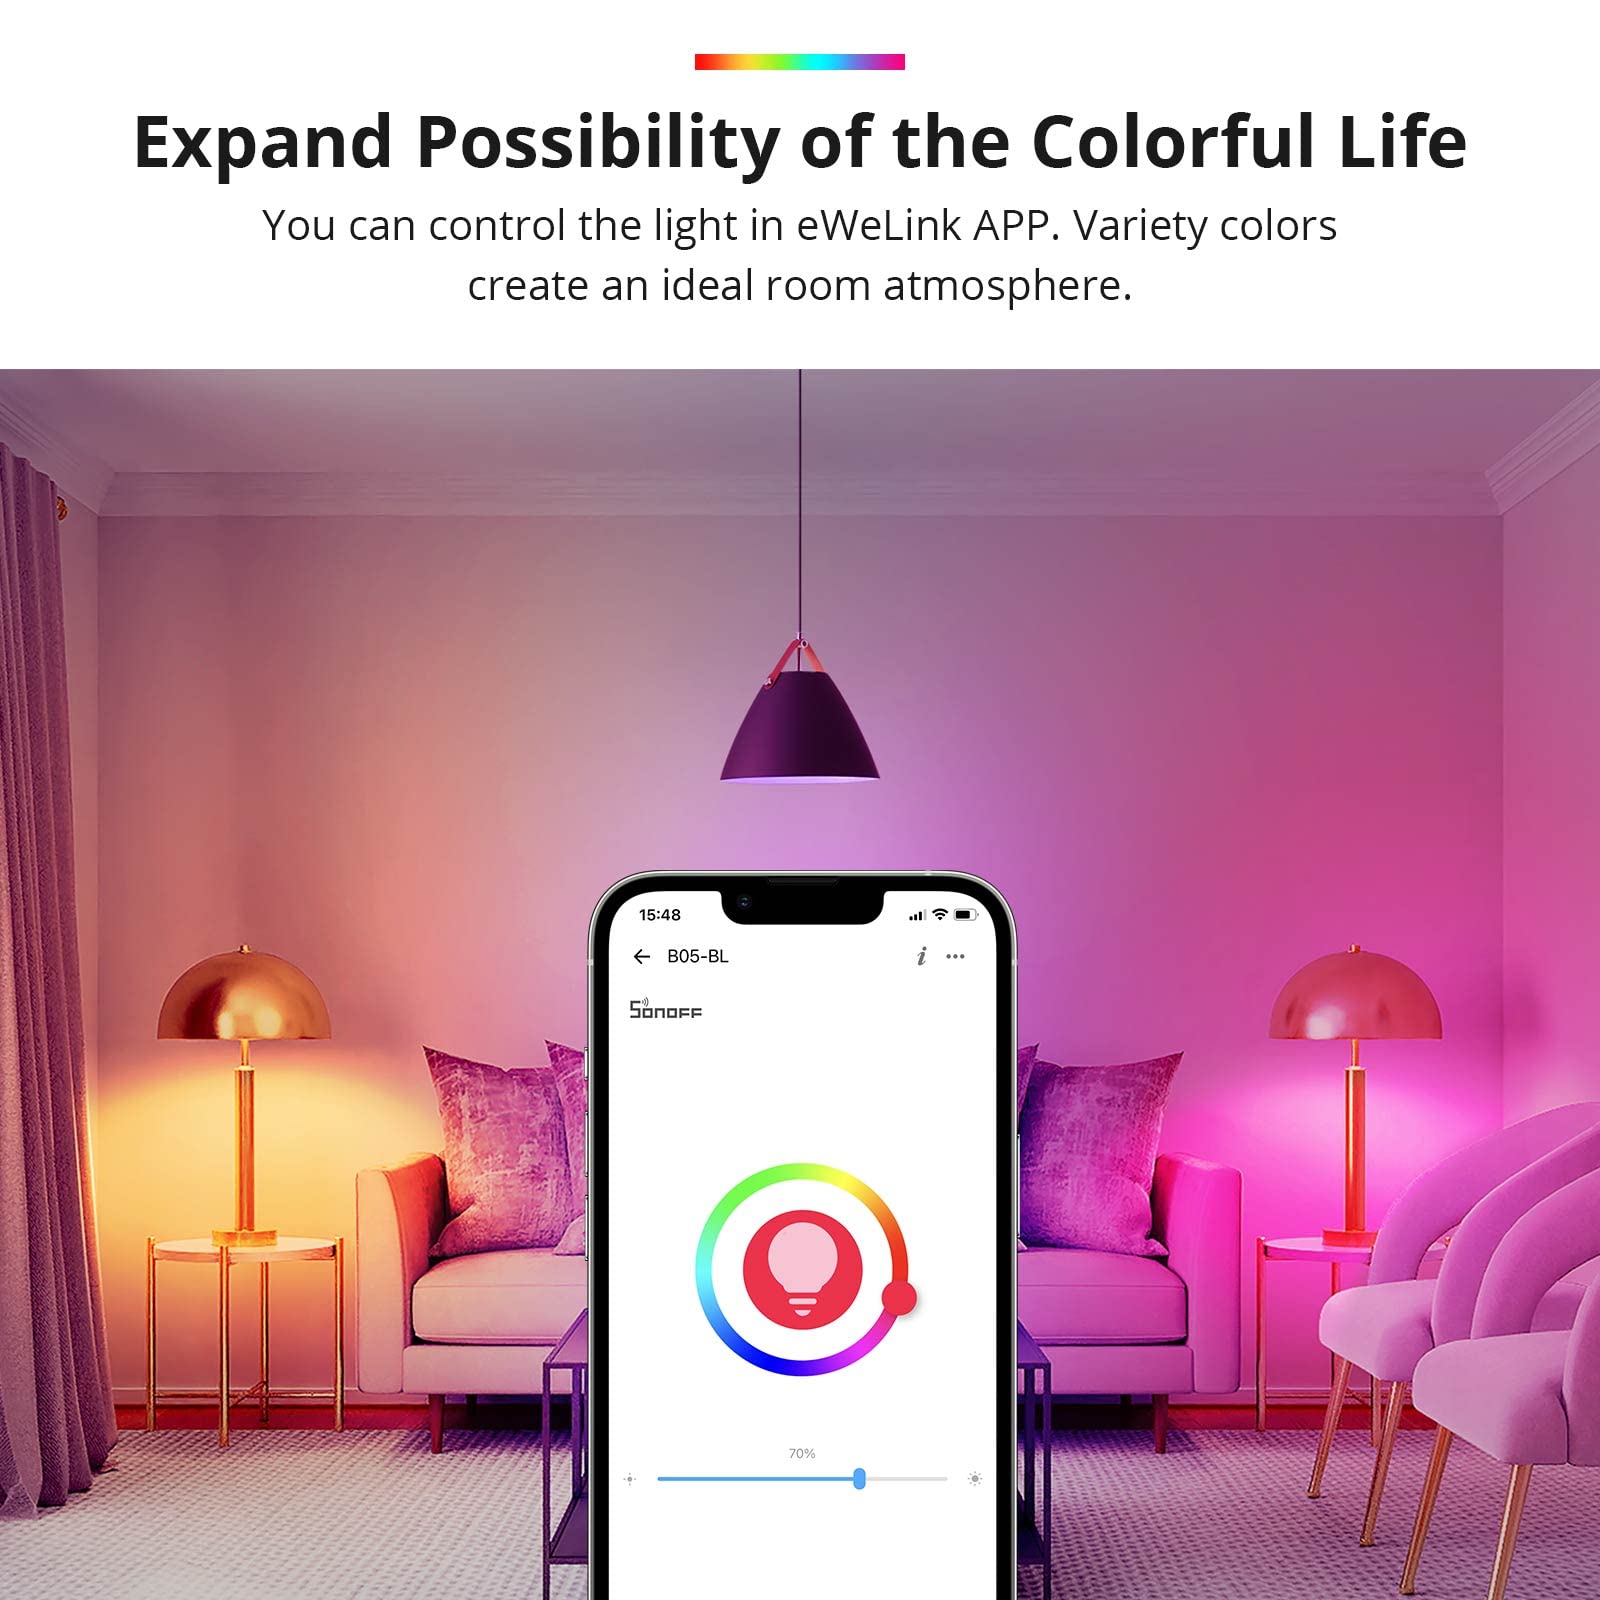 SONOFF B05-BL-A19 Wi-Fi Smart RGB Bulb 9W Variable Color, 2700K - 6500K Brightness Adjustable Color Temperature, APP Remote Control, Work with Alexa and Google Assistant (1 Pack)